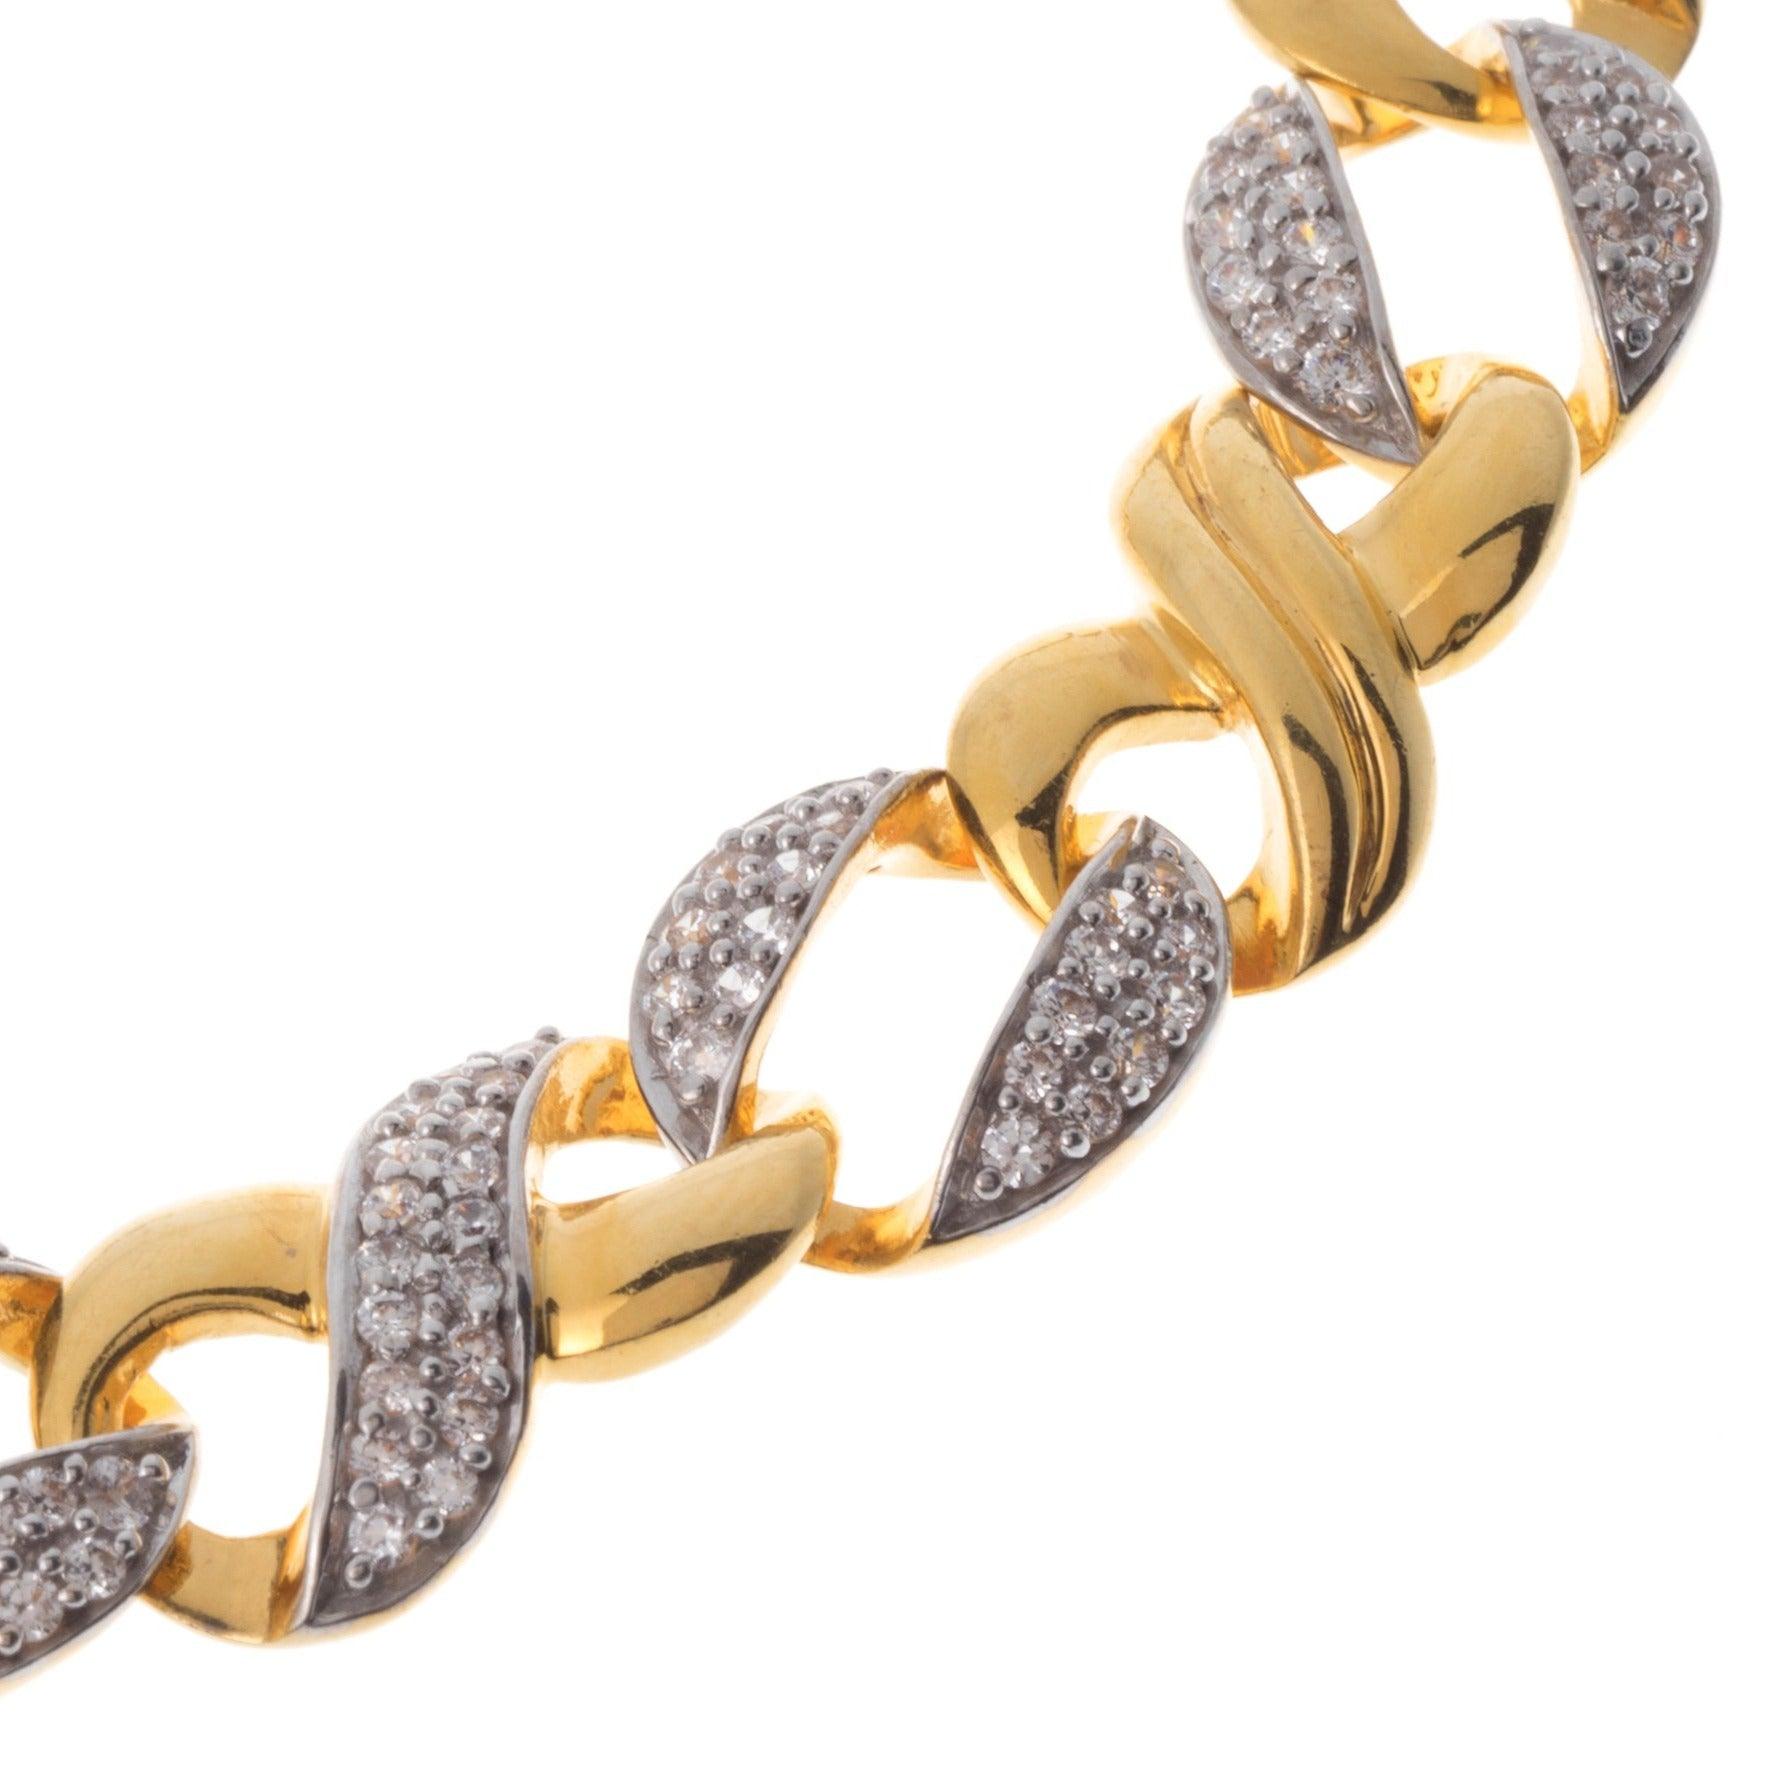 22ct Gold Curb Link Gents Bracelet with Cubic Zirconia Stones (39.96g) GBR9010 - Minar Jewellers